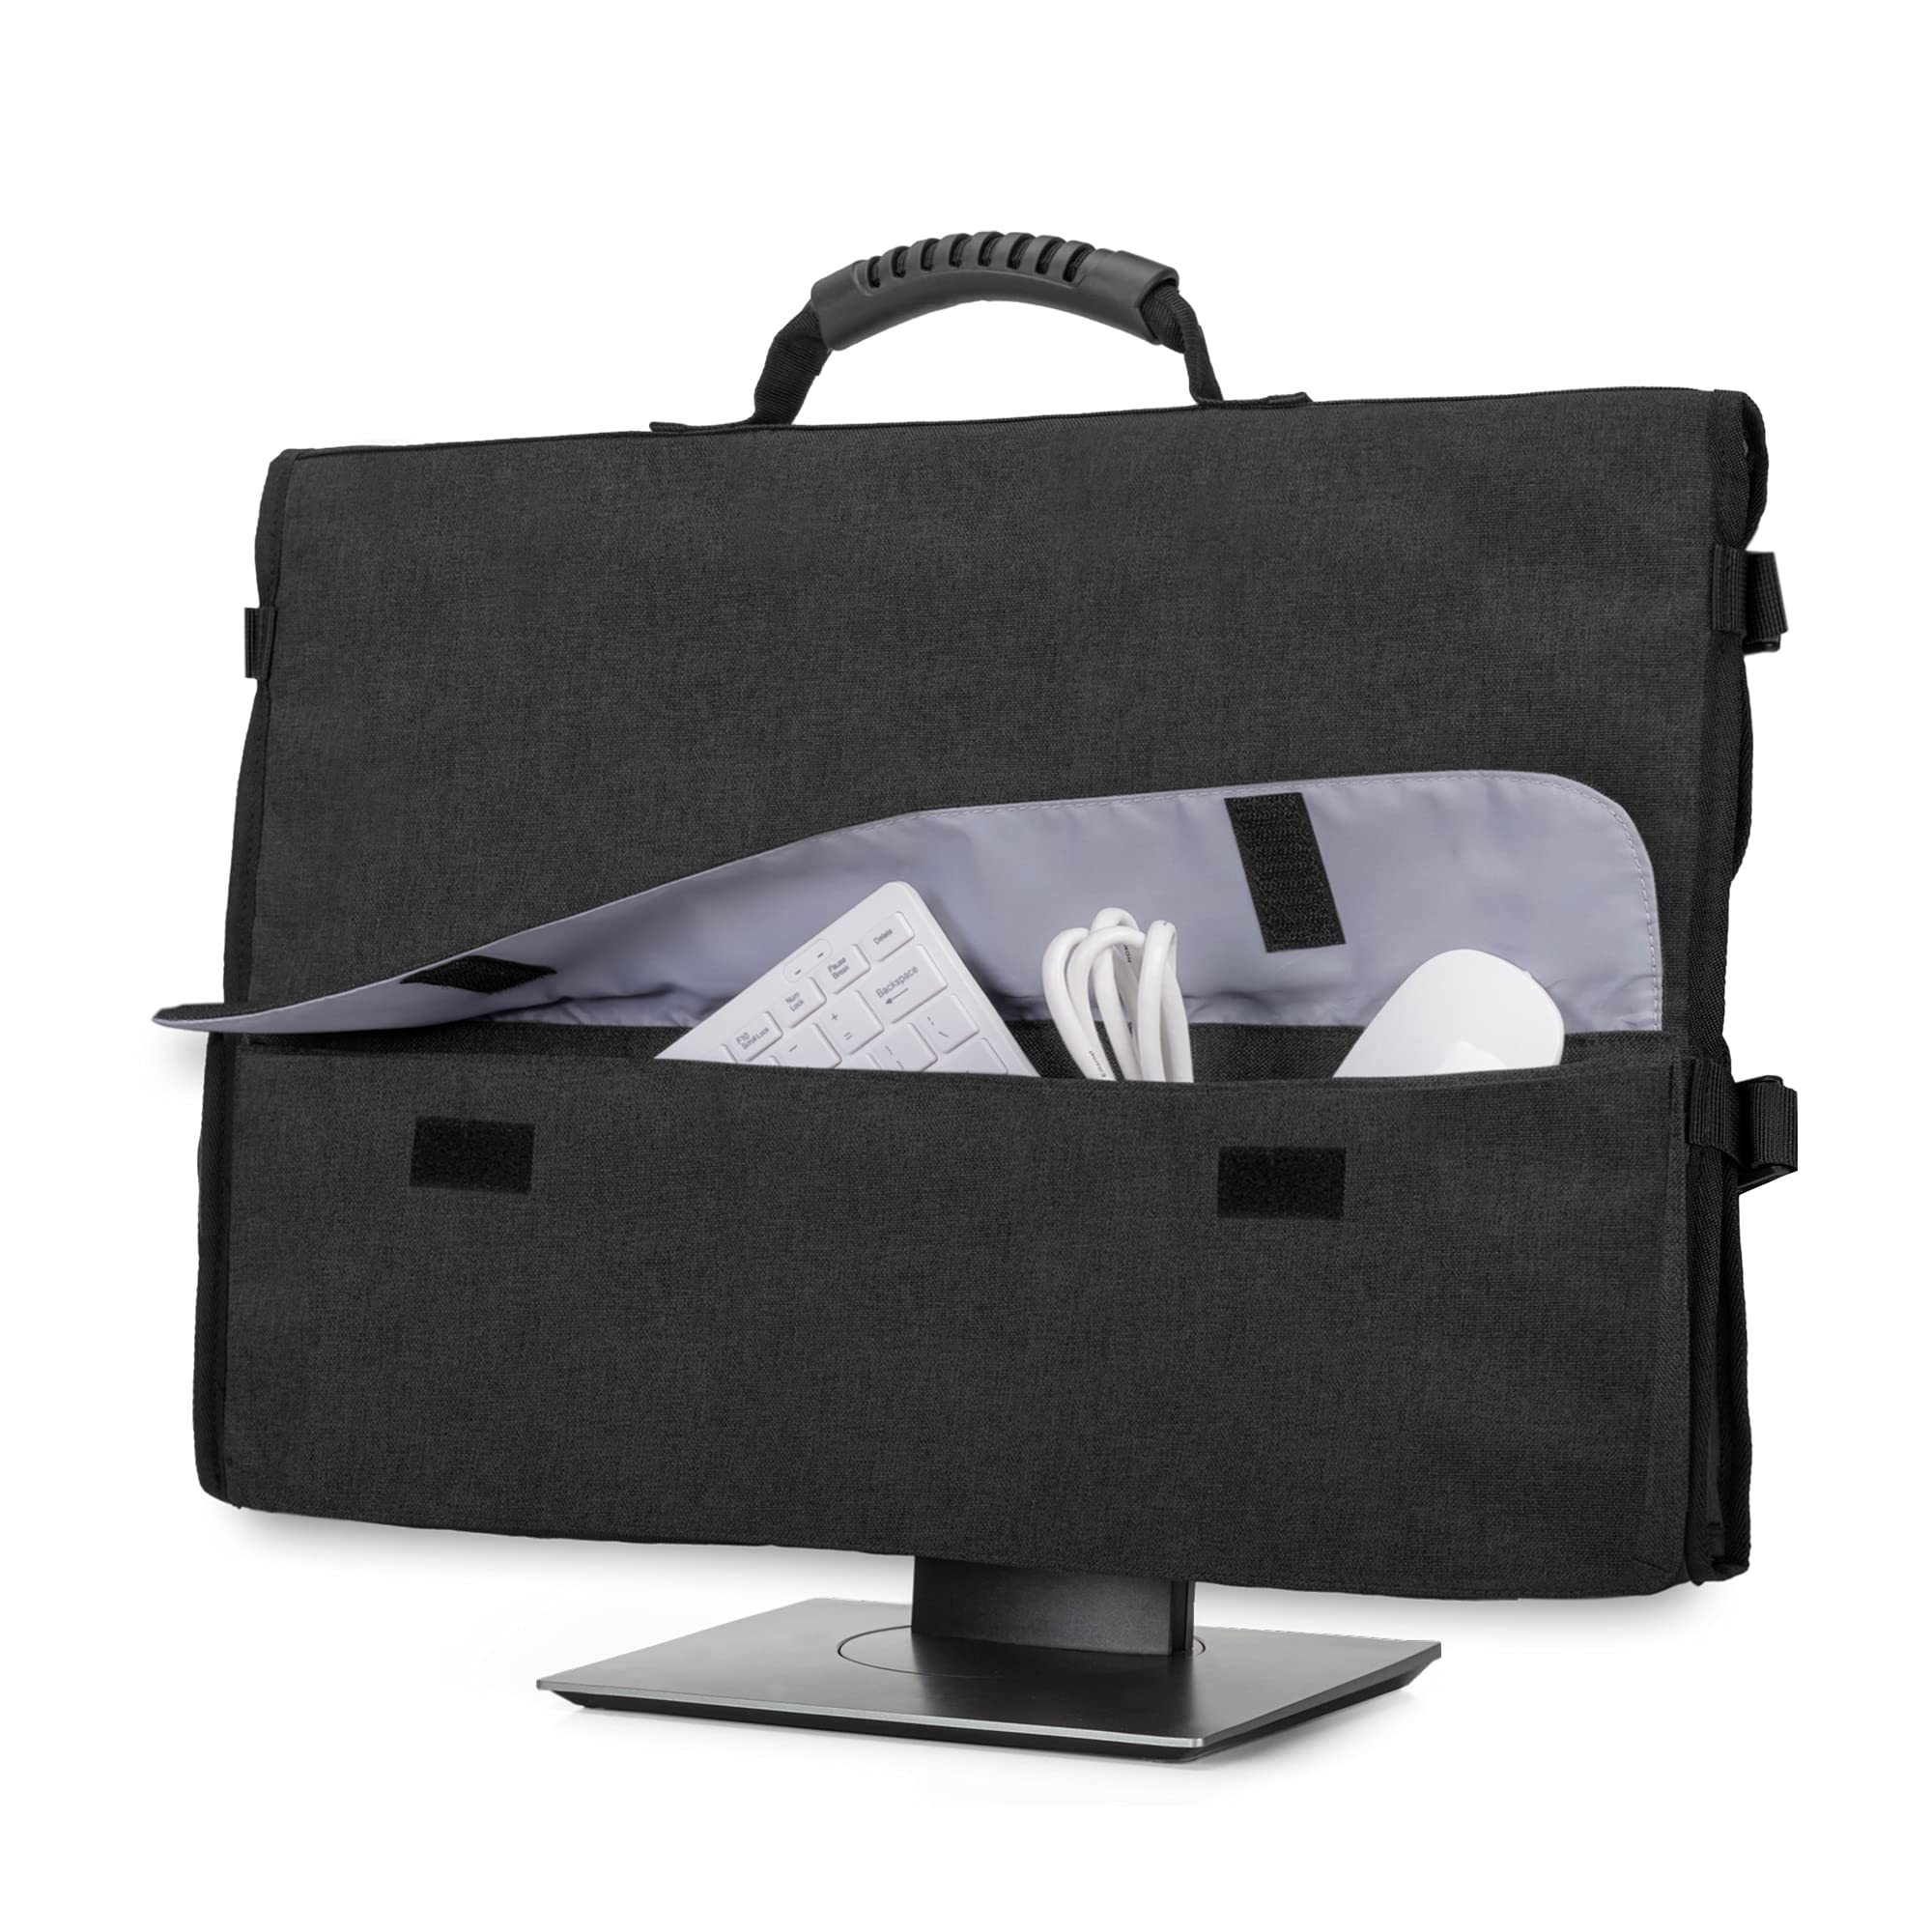 CURMIO 24 Inch Monitor Carrying Case, Universal 24